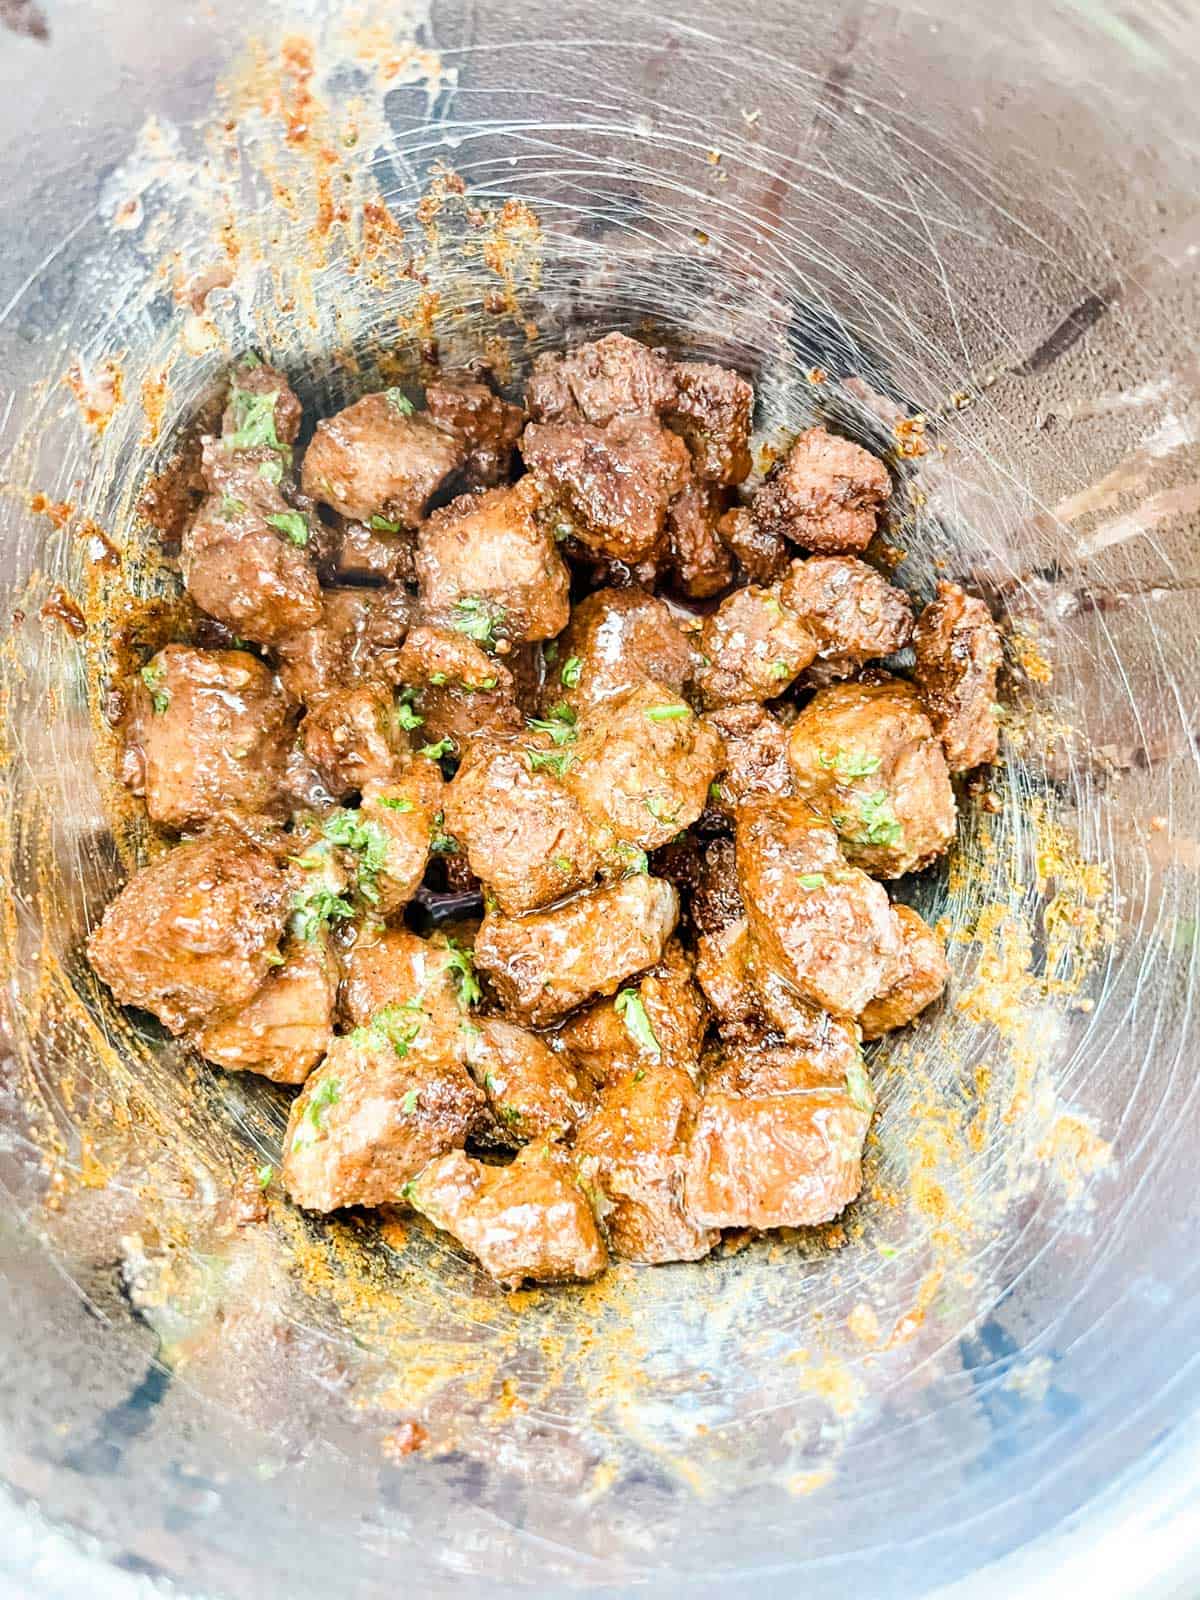 Photo of air fryer steak bites that have been tossed with garlic butter.